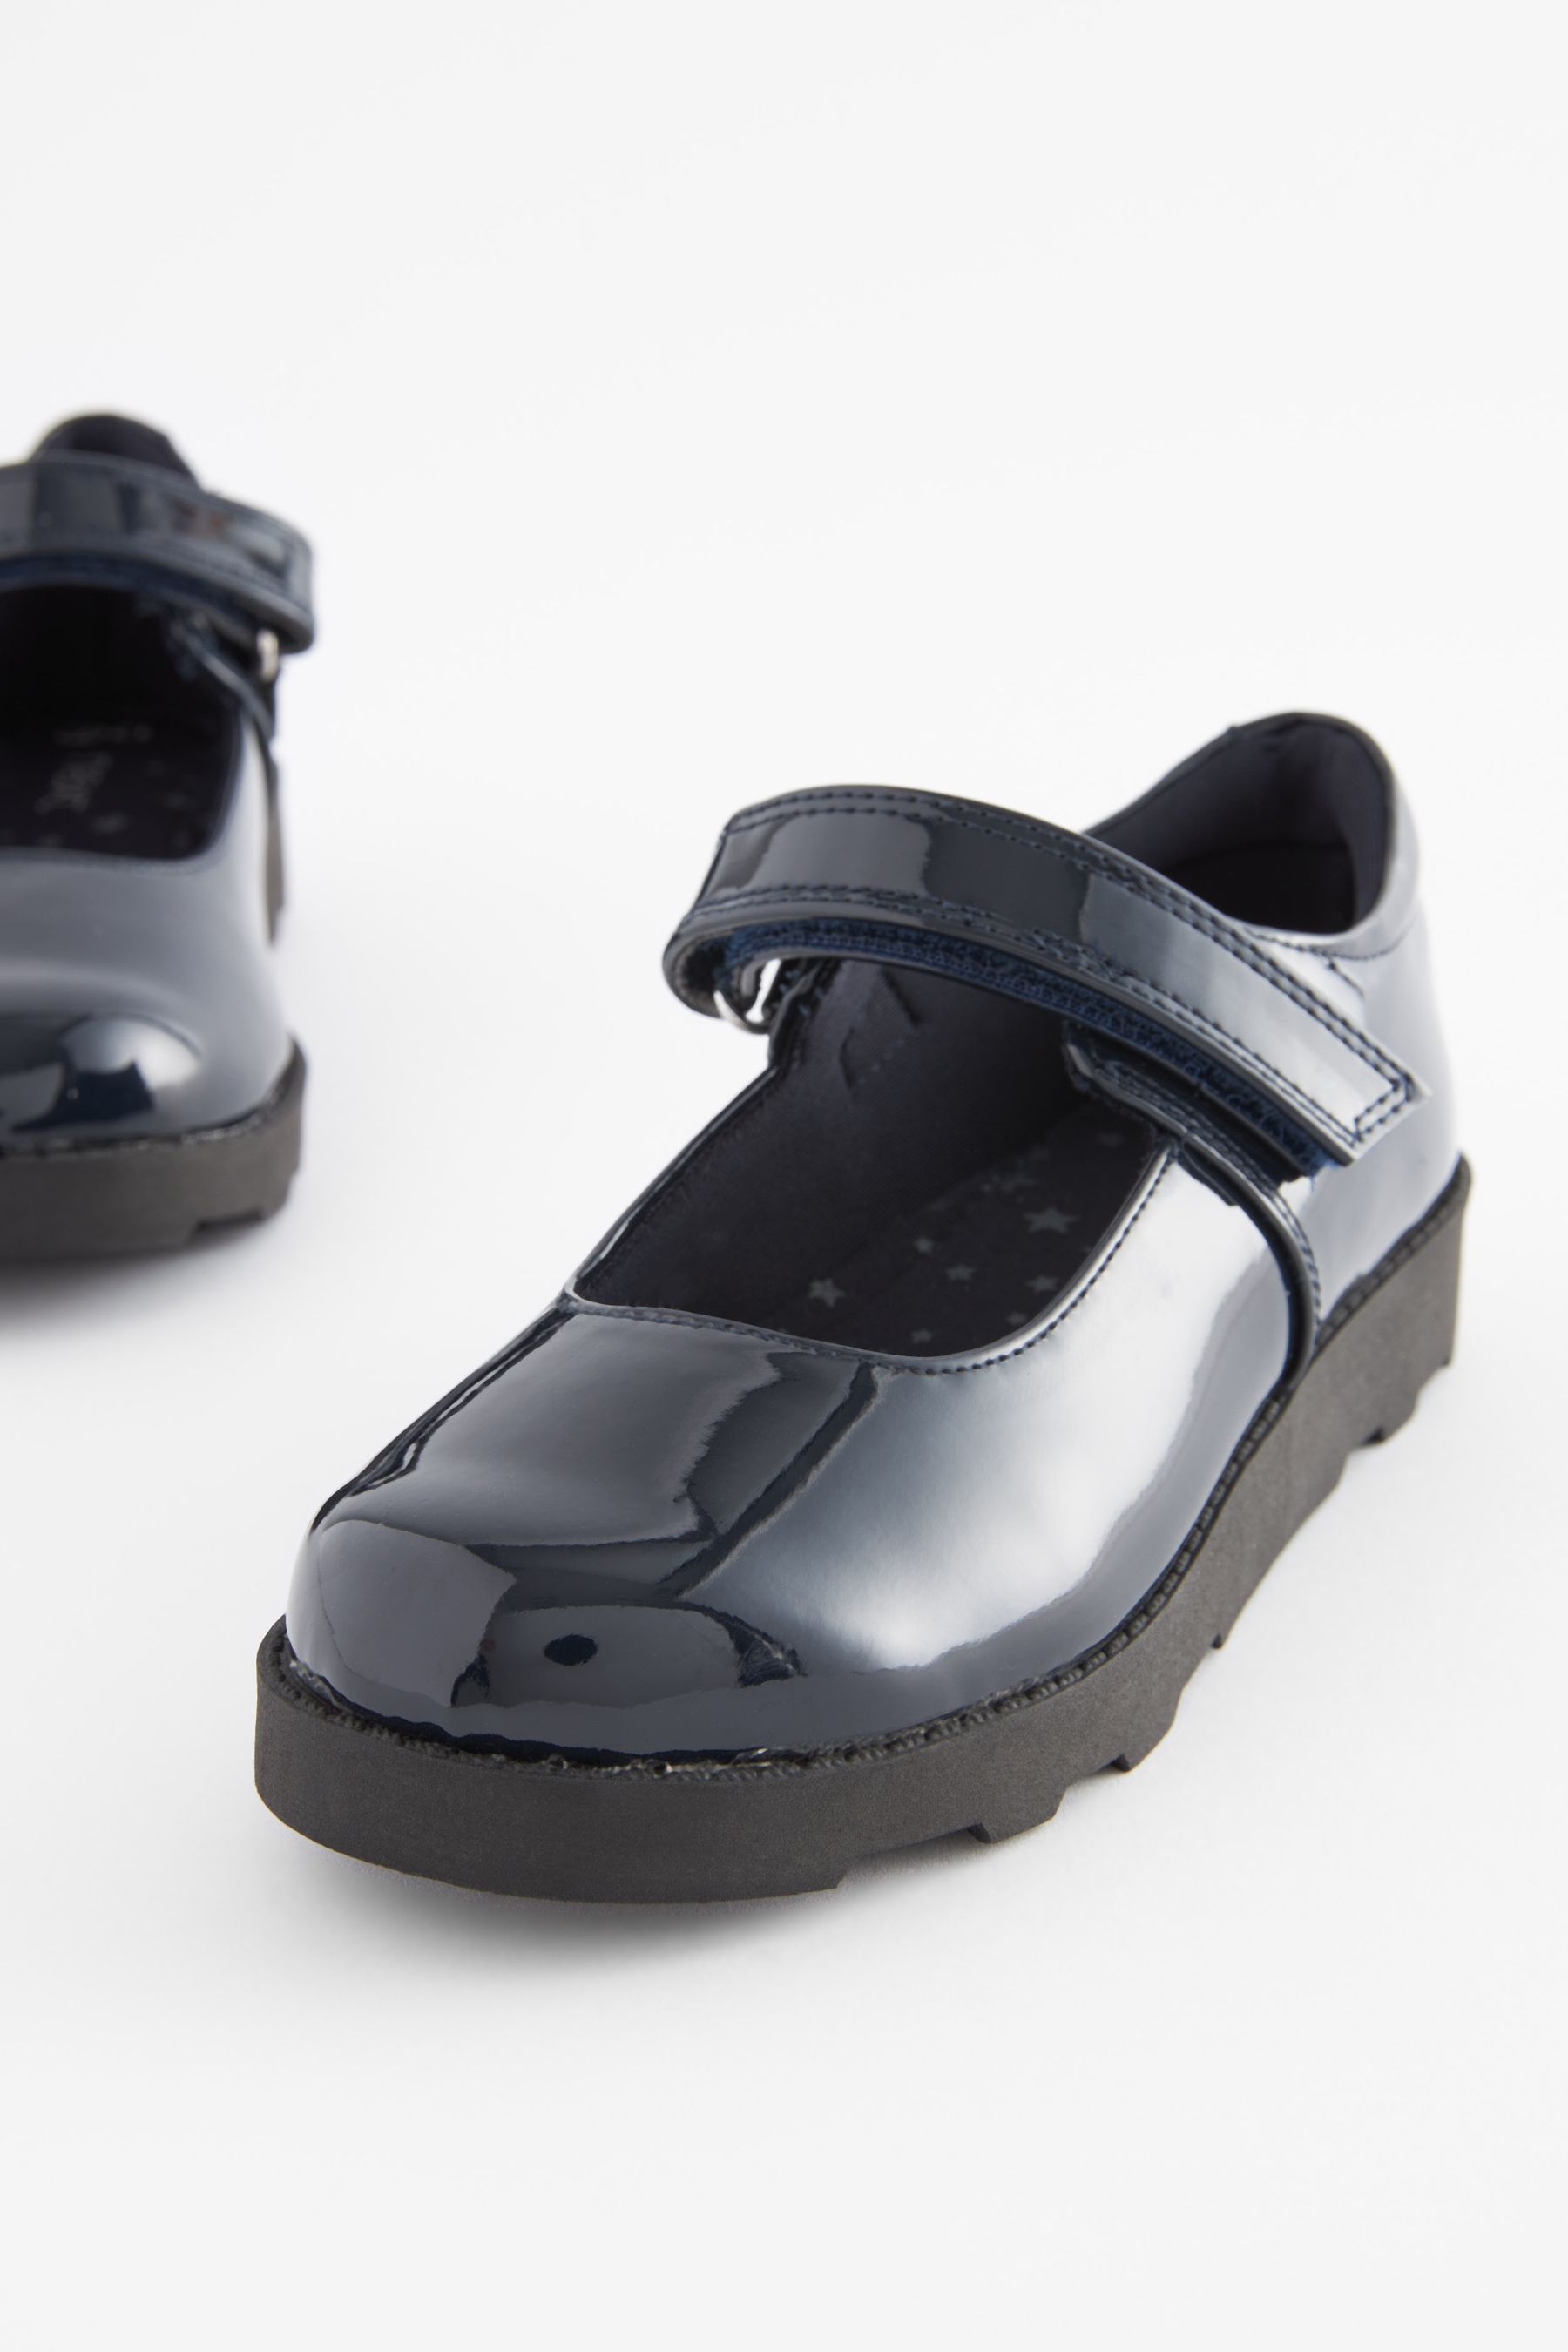 Buy Navy Patent Junior School Mary Jane Shoes from the Next UK online shop